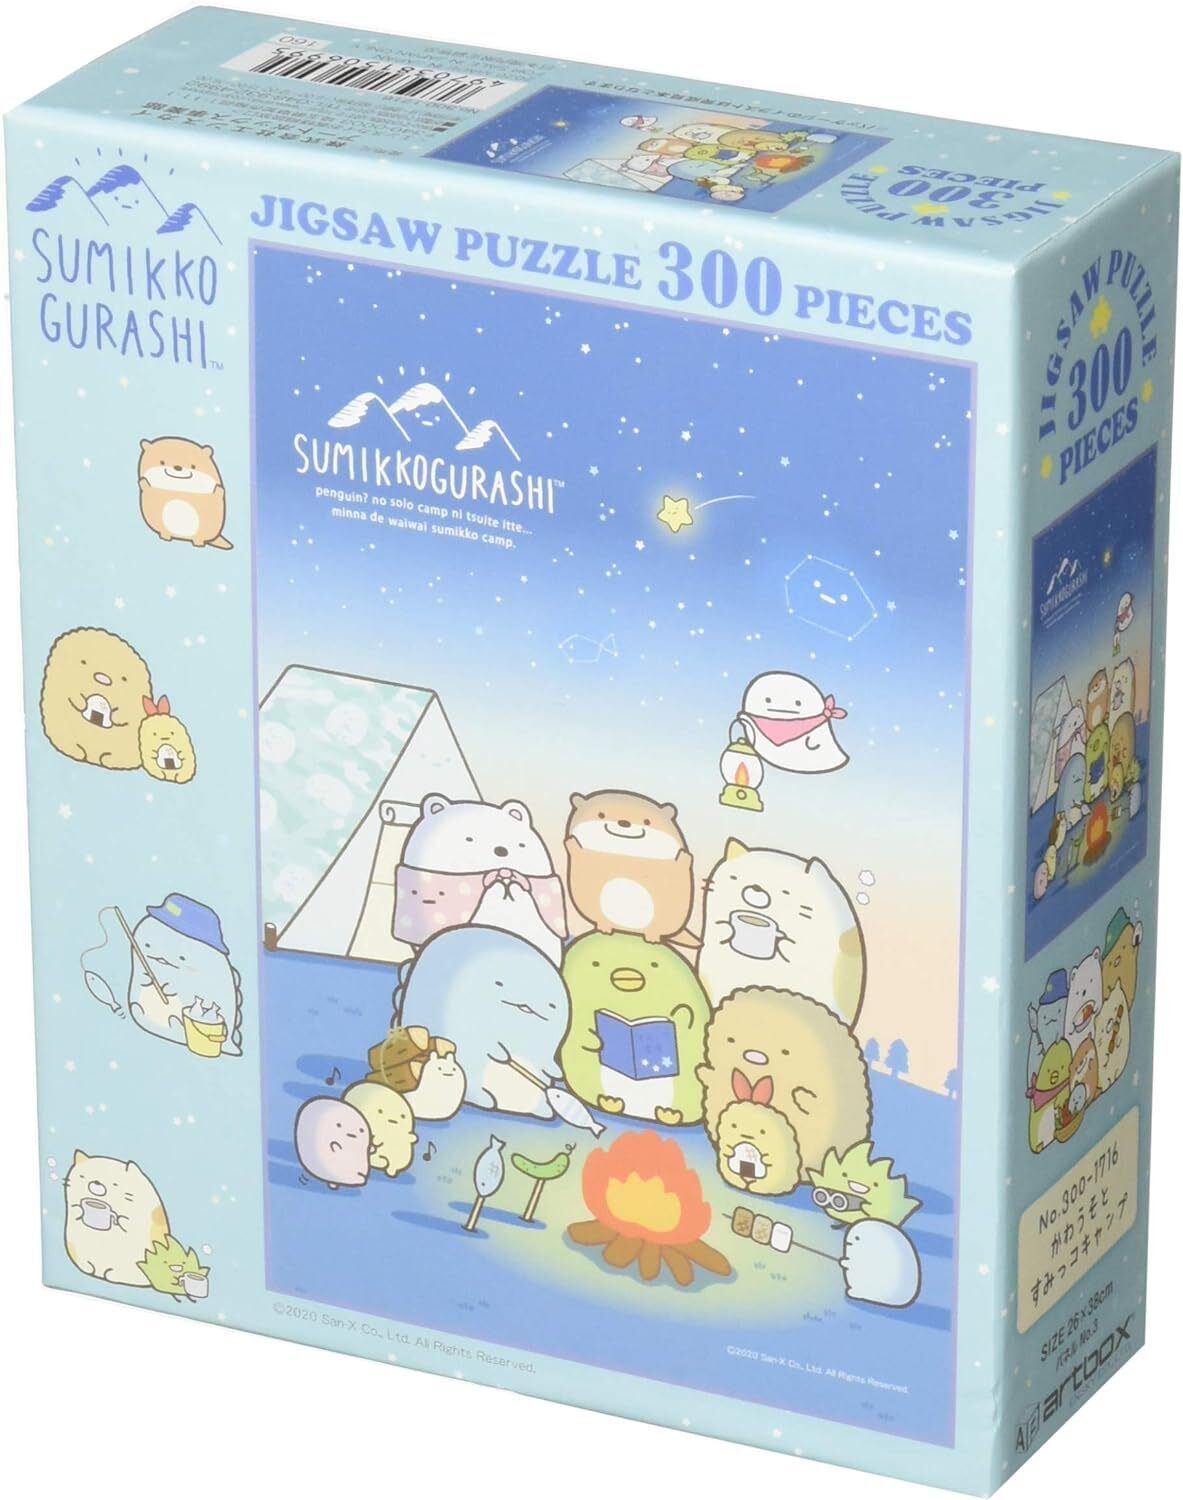 300 pieces Jigsaw Puzzle Sumicco-Gurashi Otters and camp (38×26cm) 300-1716